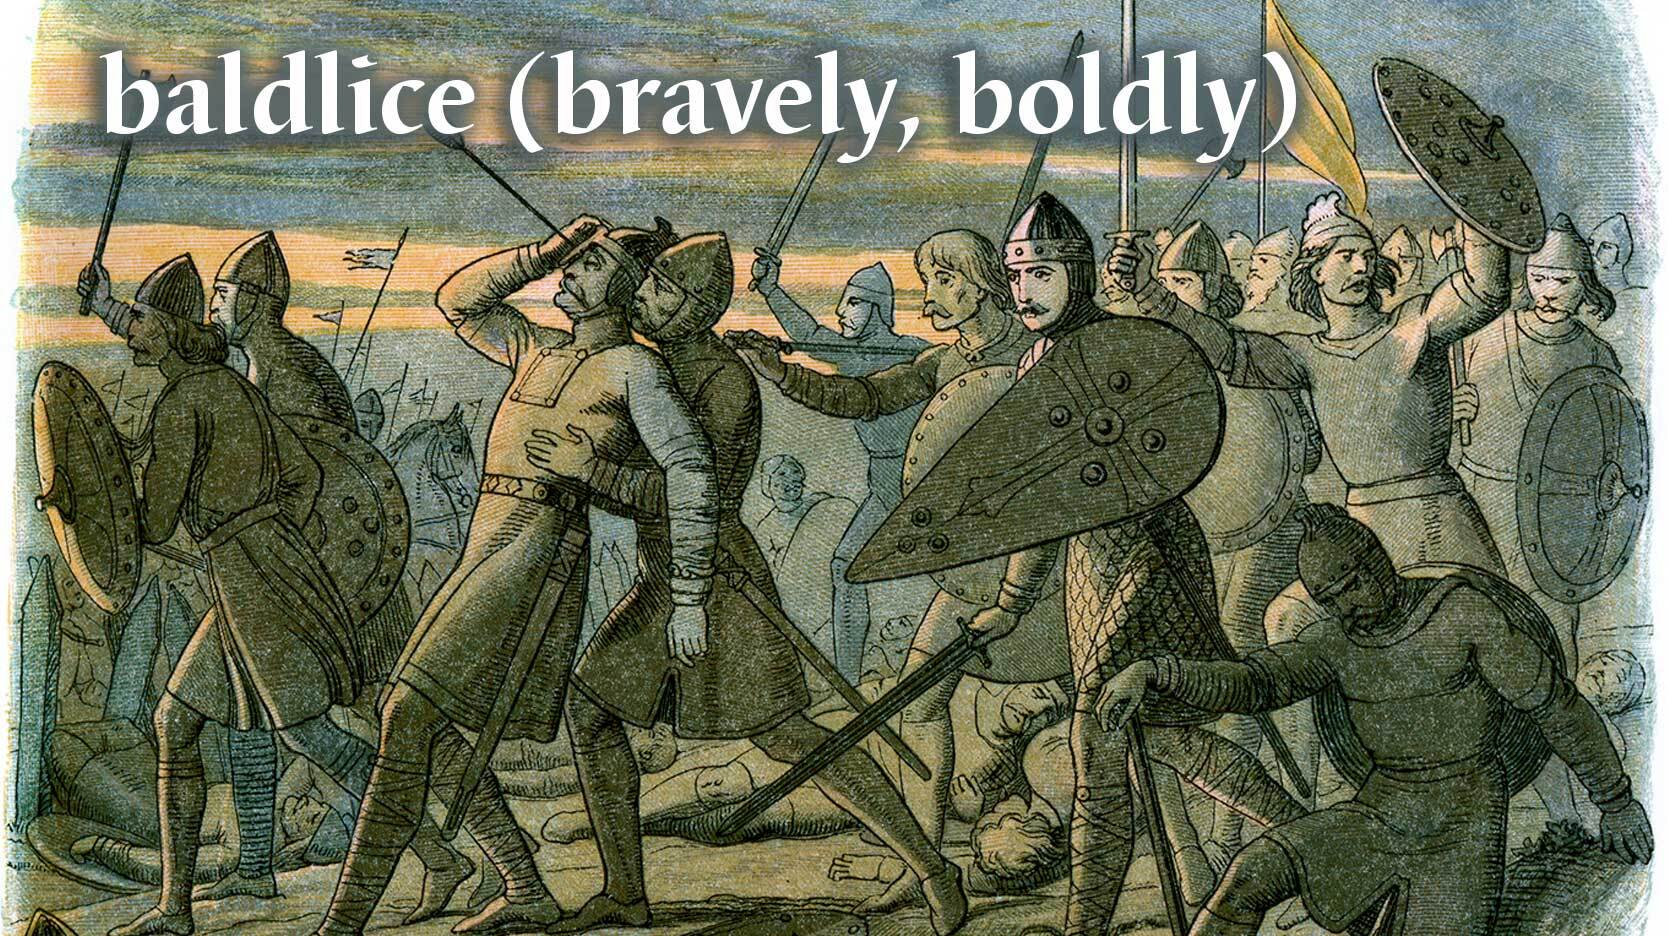 baldlice old English word means bravely boldly